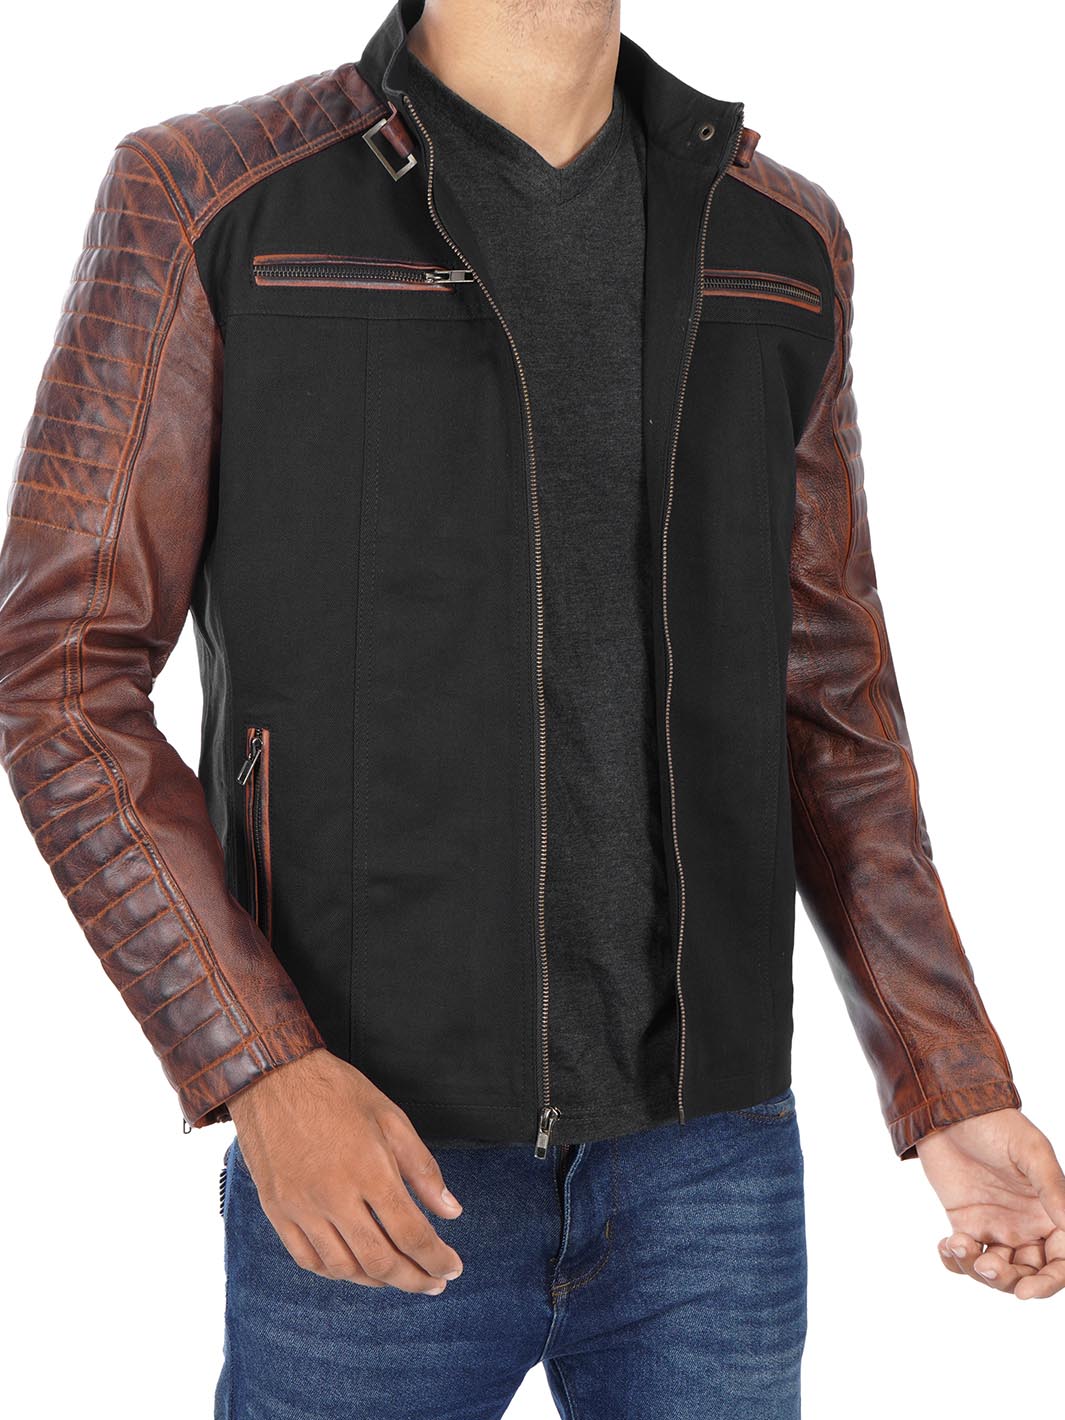 Darrell Cafe Racer Mens Black and Brown Leather Jacket